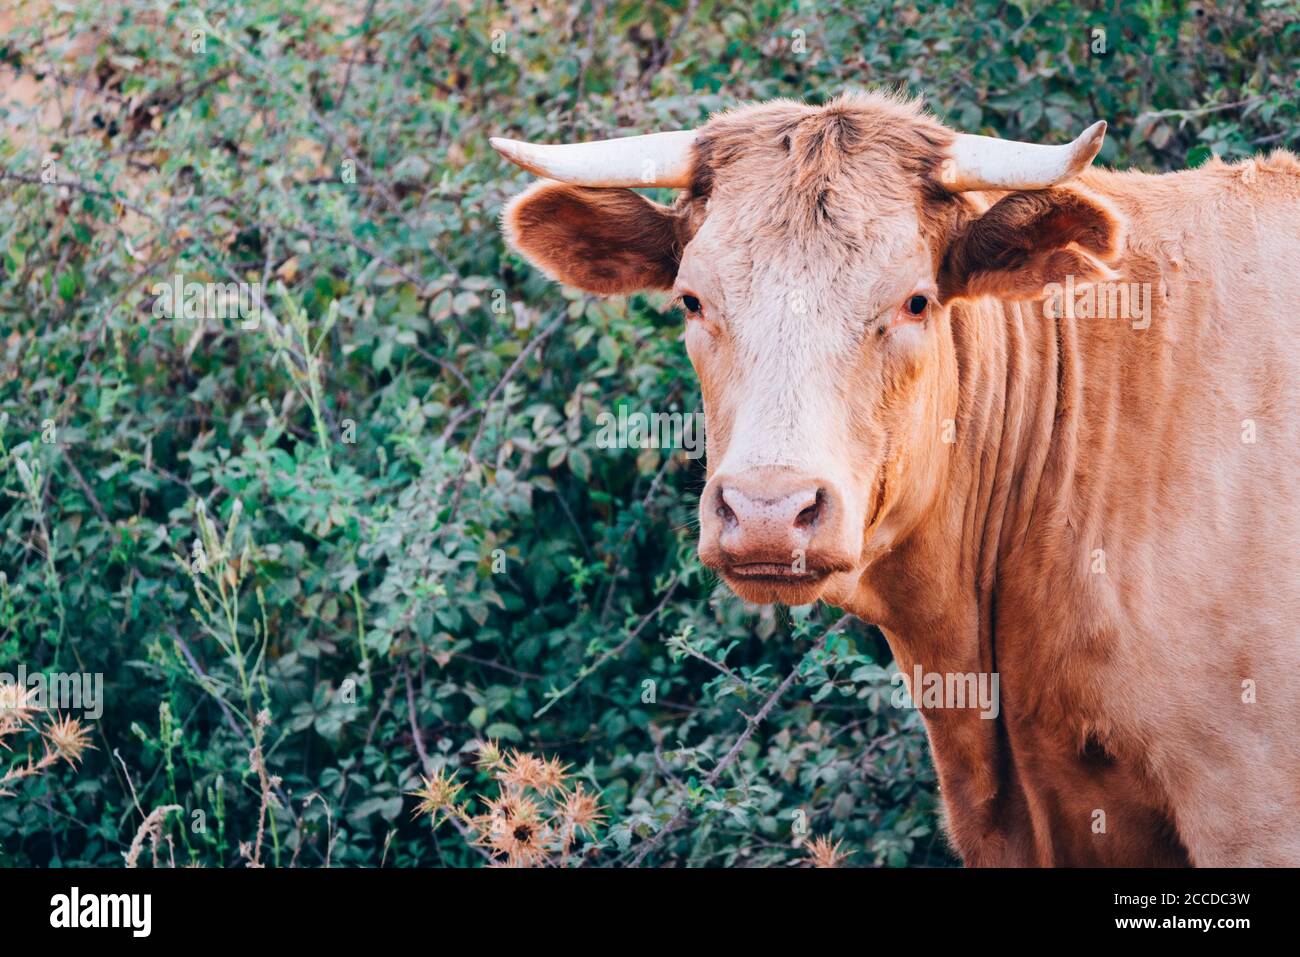 close-up portrait of a cow with copy space for text Stock Photo